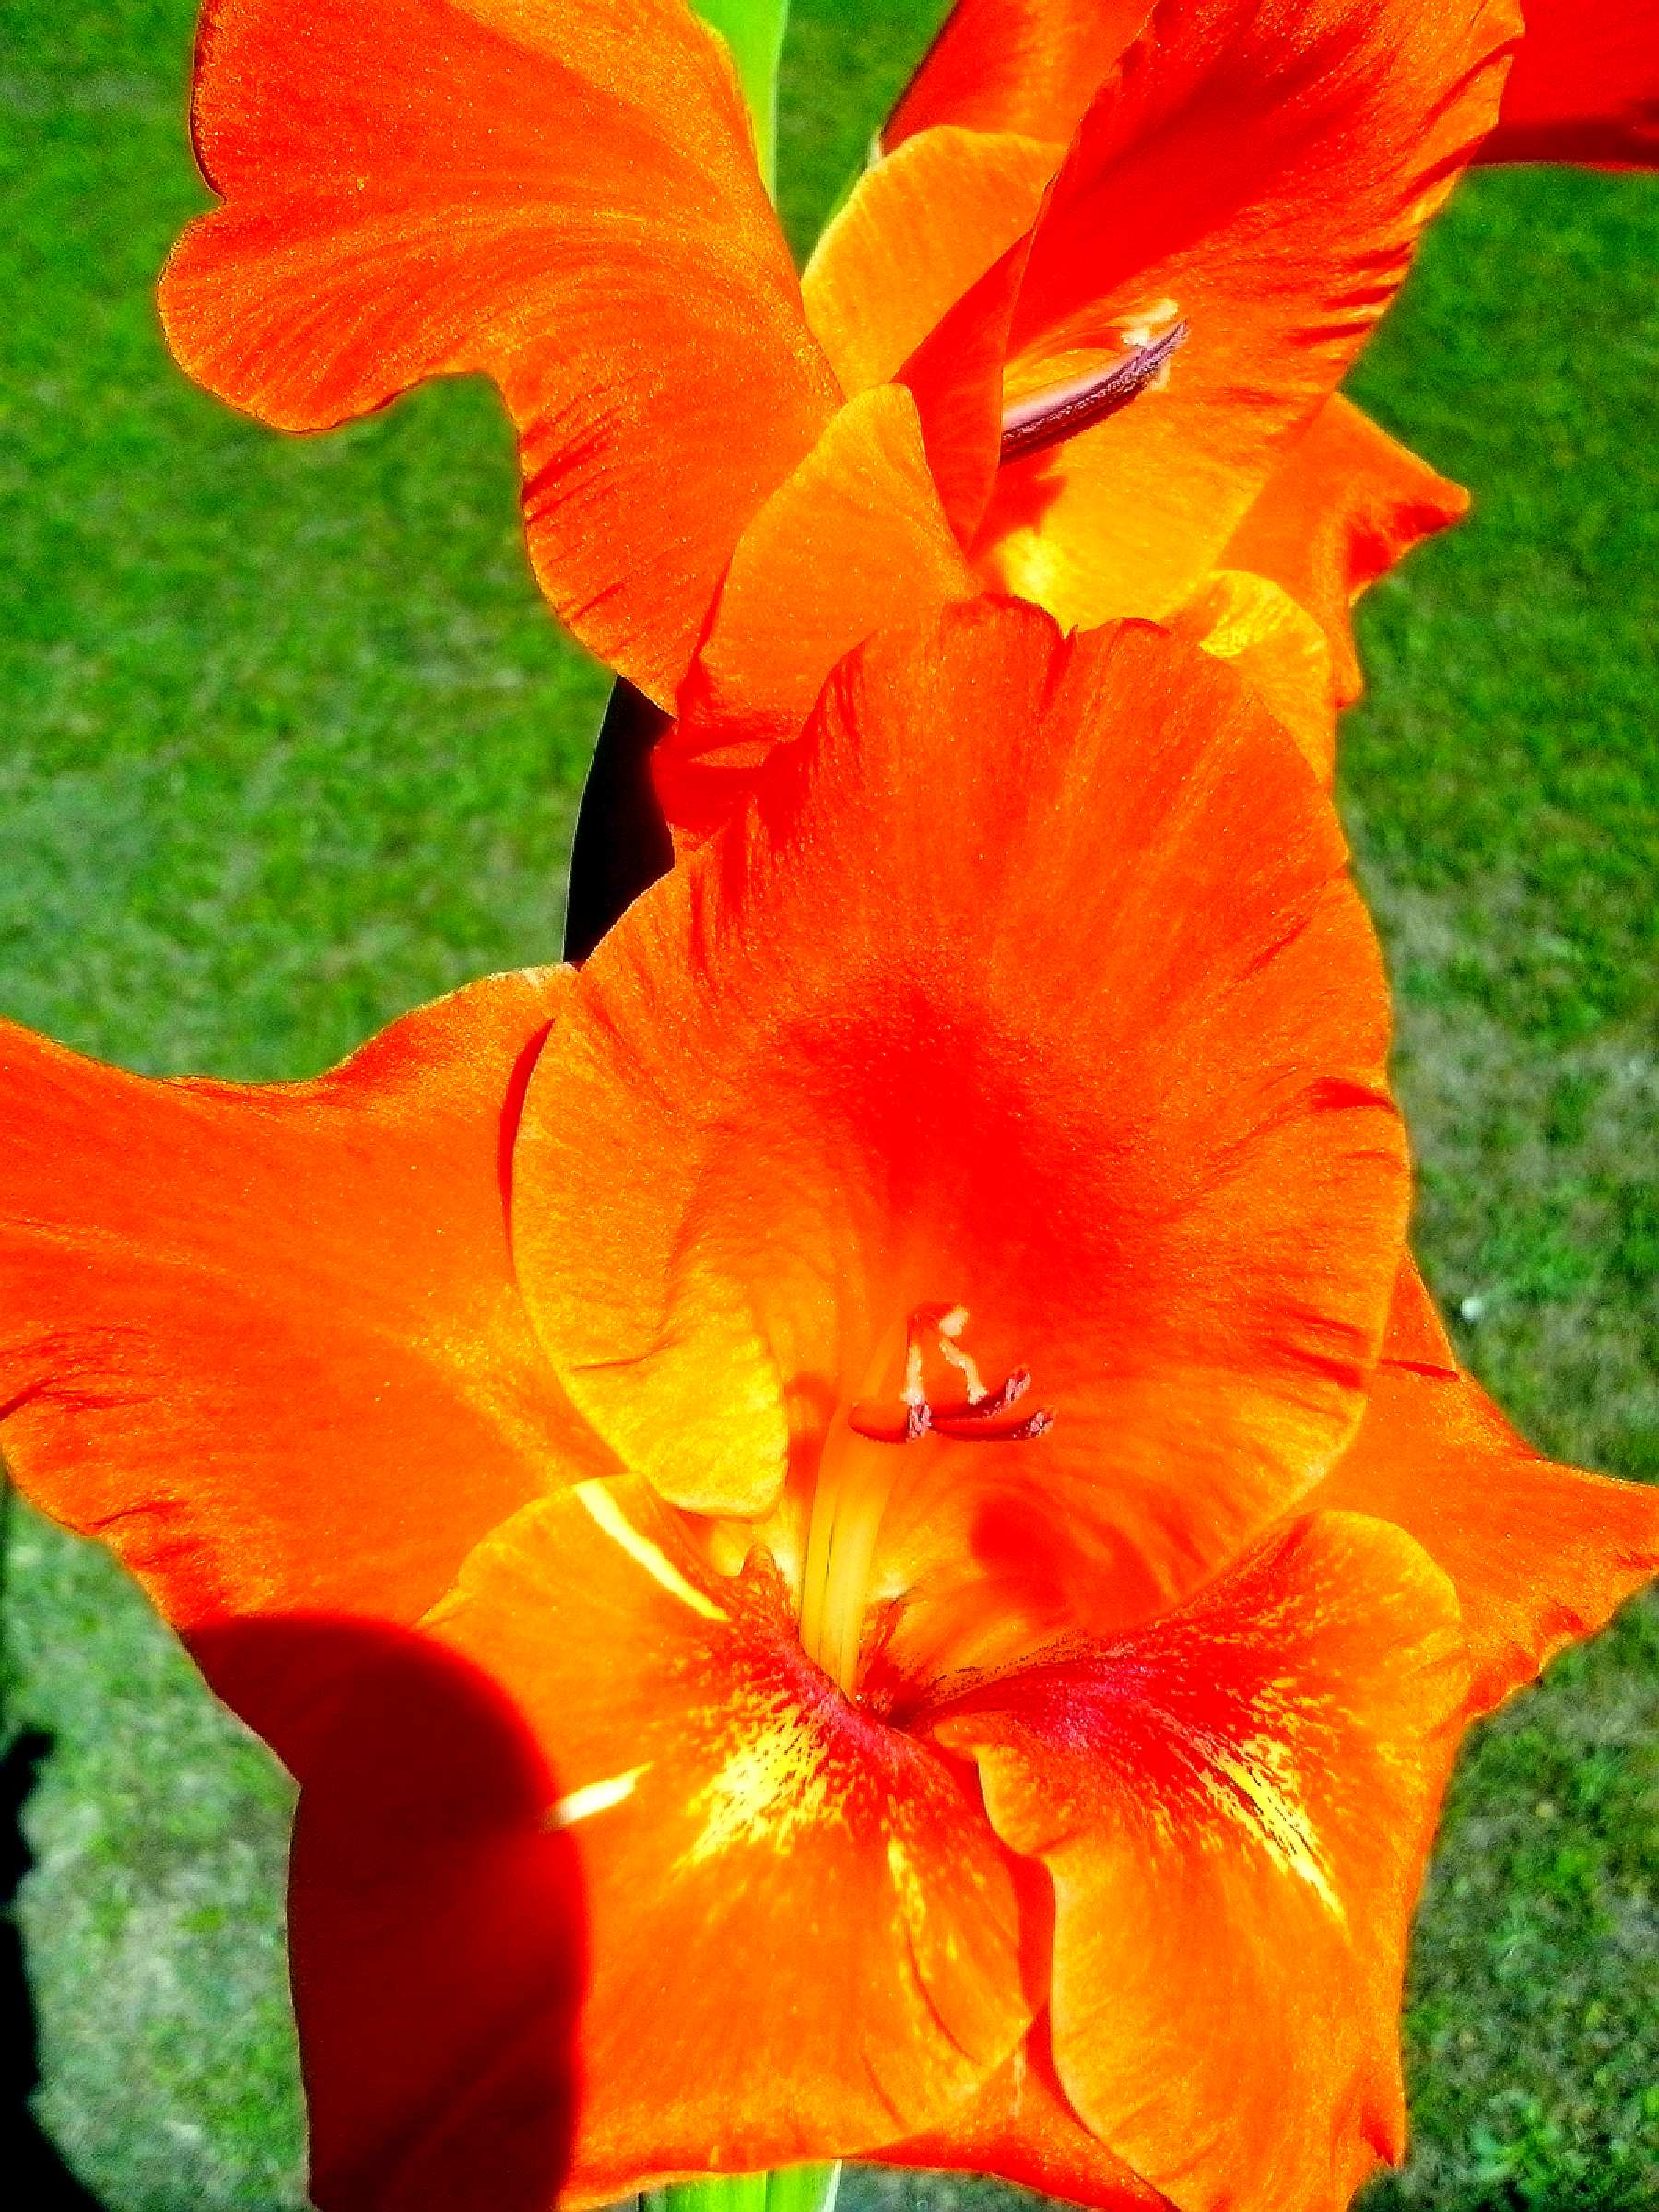 Free picture: bright, orange flower, petals, blooming